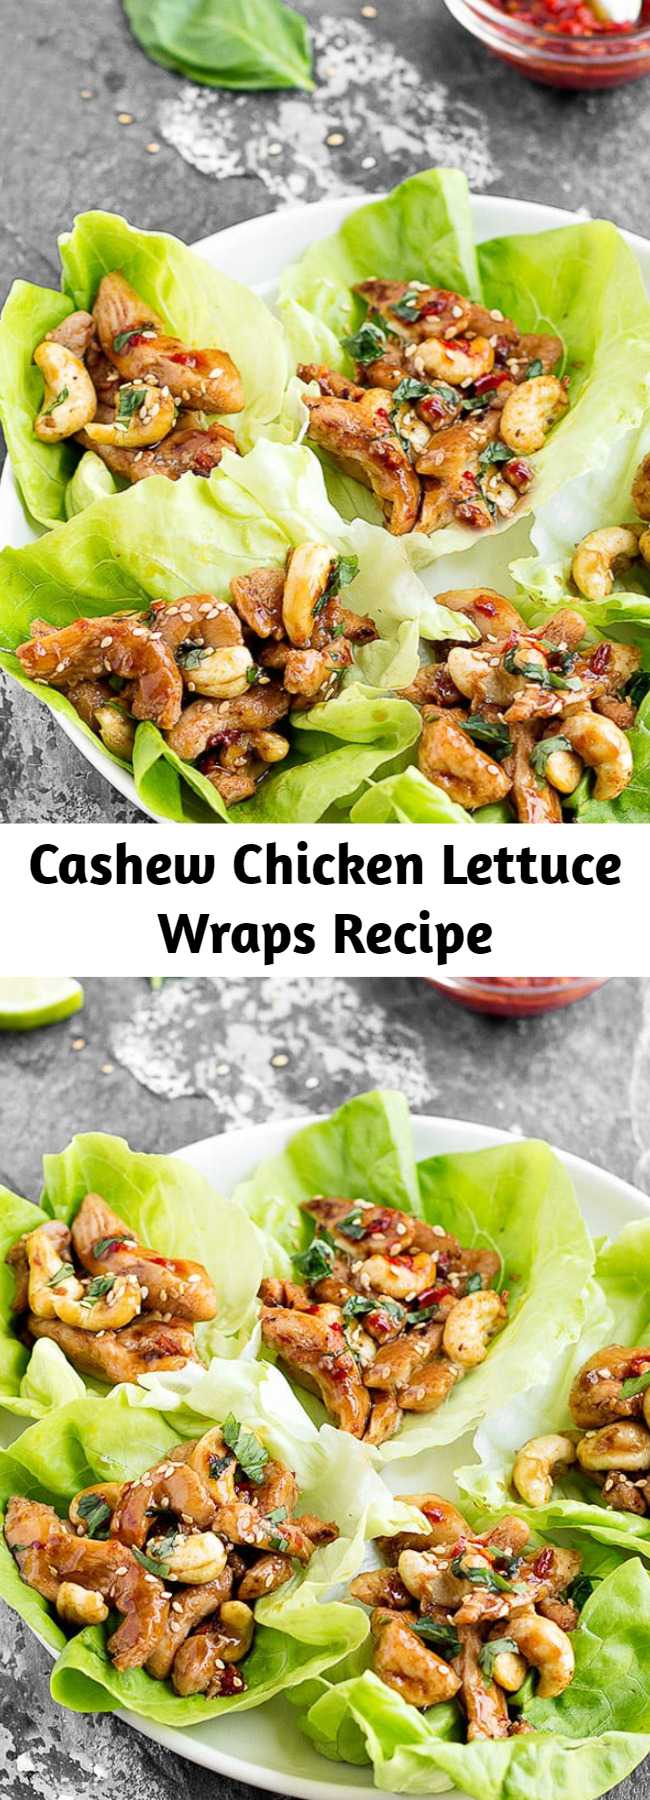 Cashew Chicken Lettuce Wraps Recipe - These Cashew Chicken Lettuce Wraps are perfect for lunch, dinner, or even as a tasty appetizer. Simple, easy and healthy. Each wrap has only 165 calories!